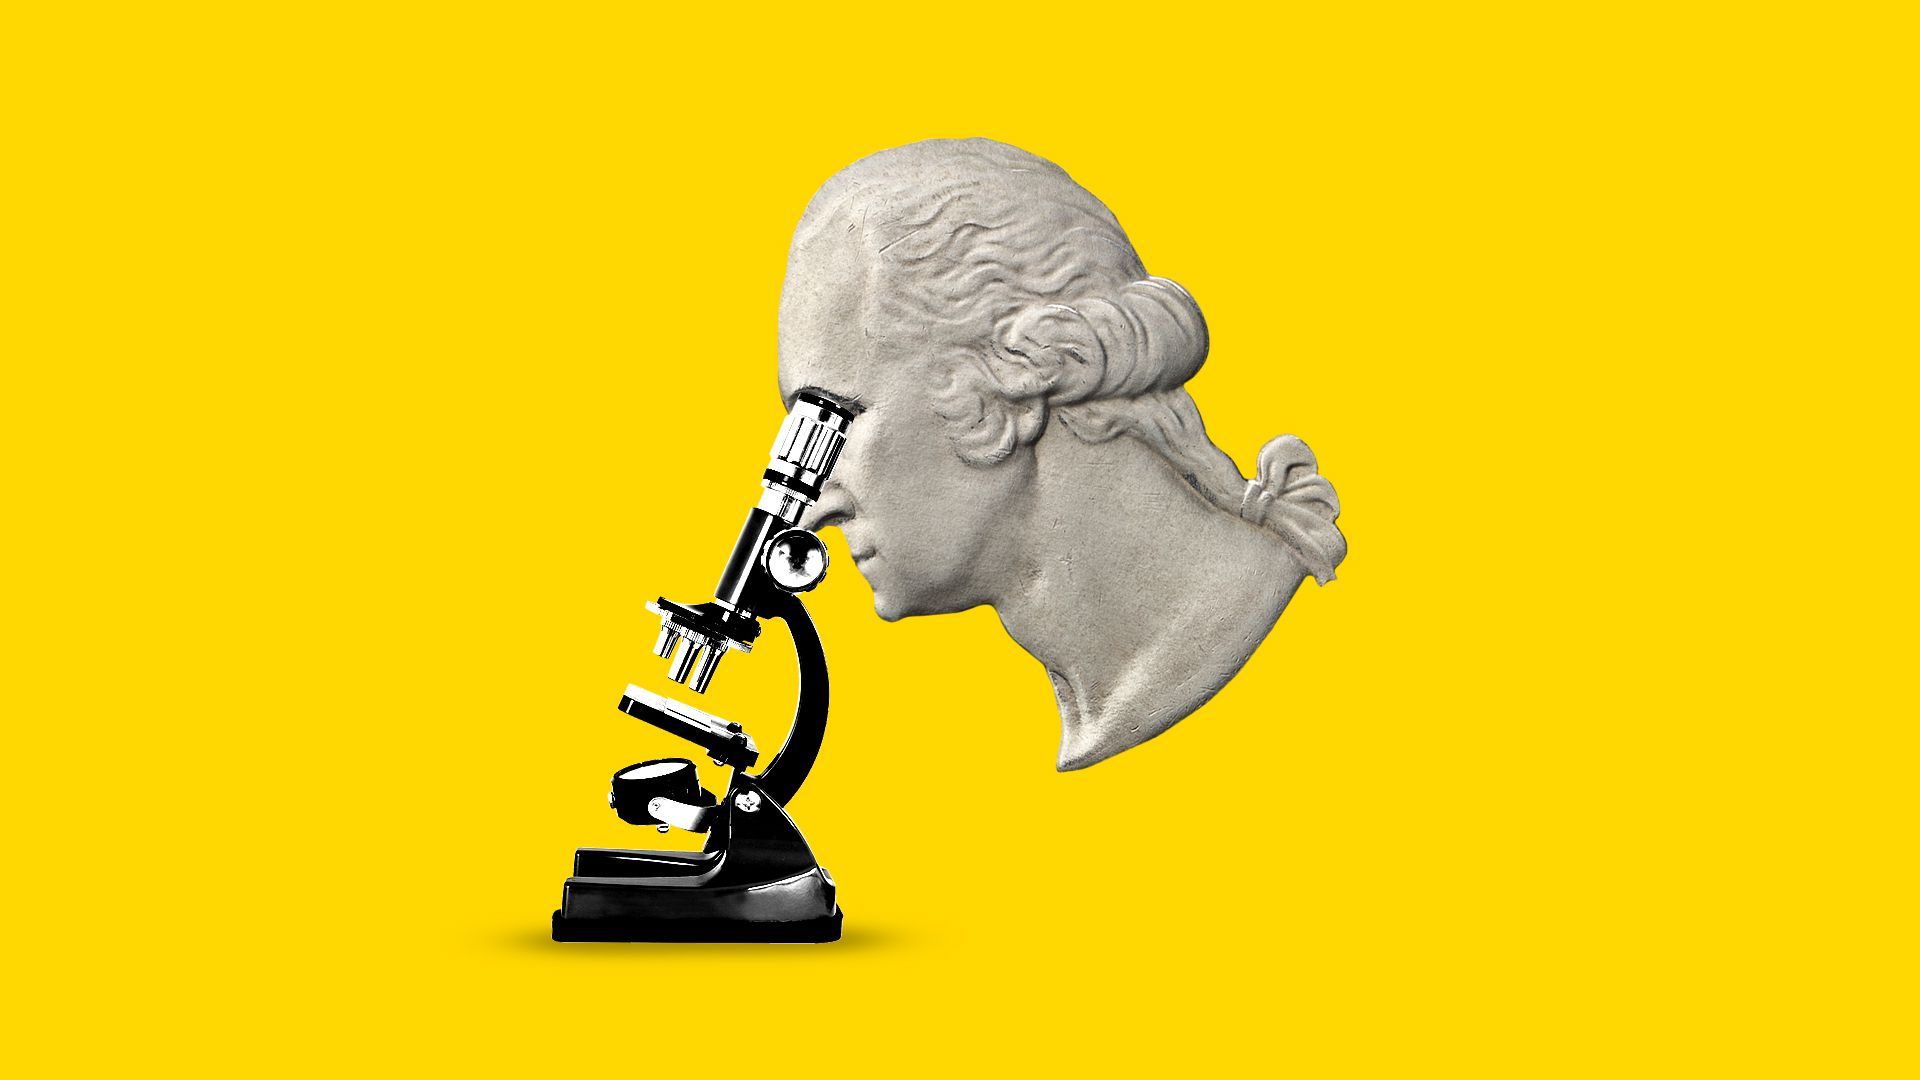 Illustration of George Washington from a quarter looking into a microscope